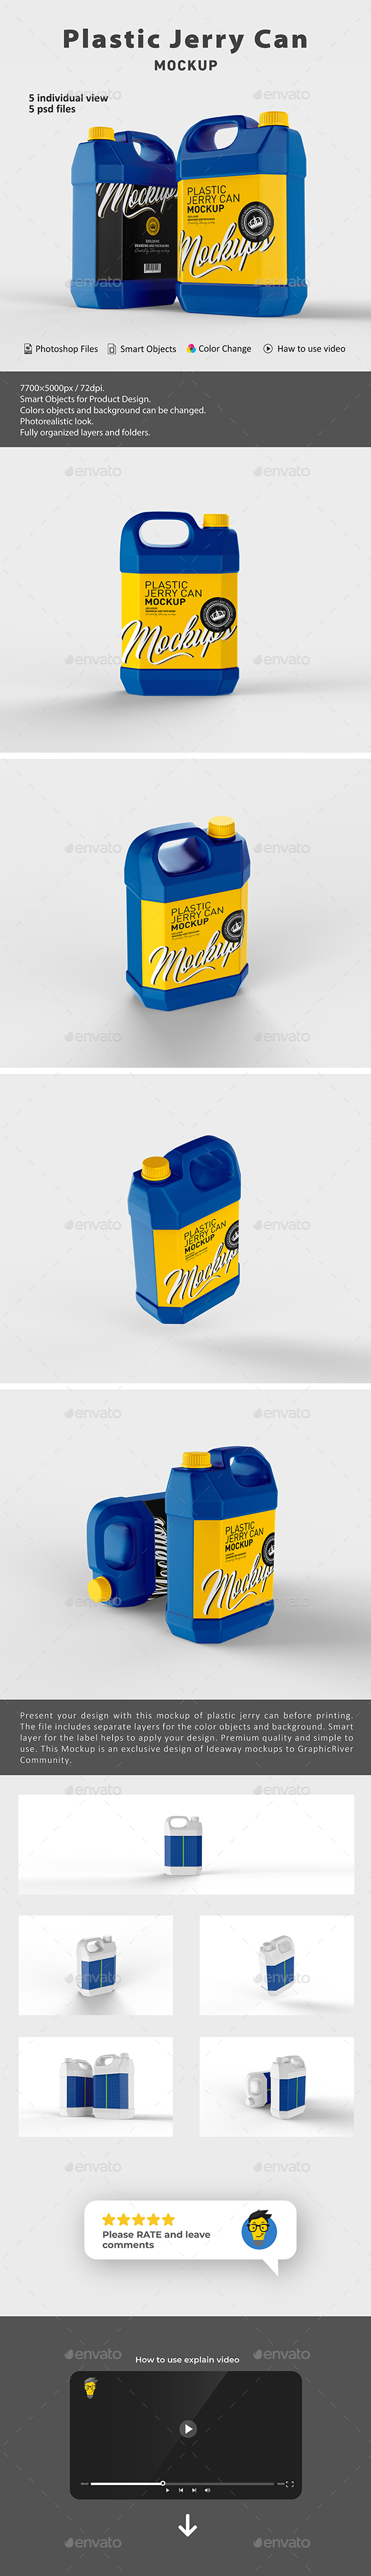 Download Plastic Jerry Can Mockup By Idaeway Graphicriver